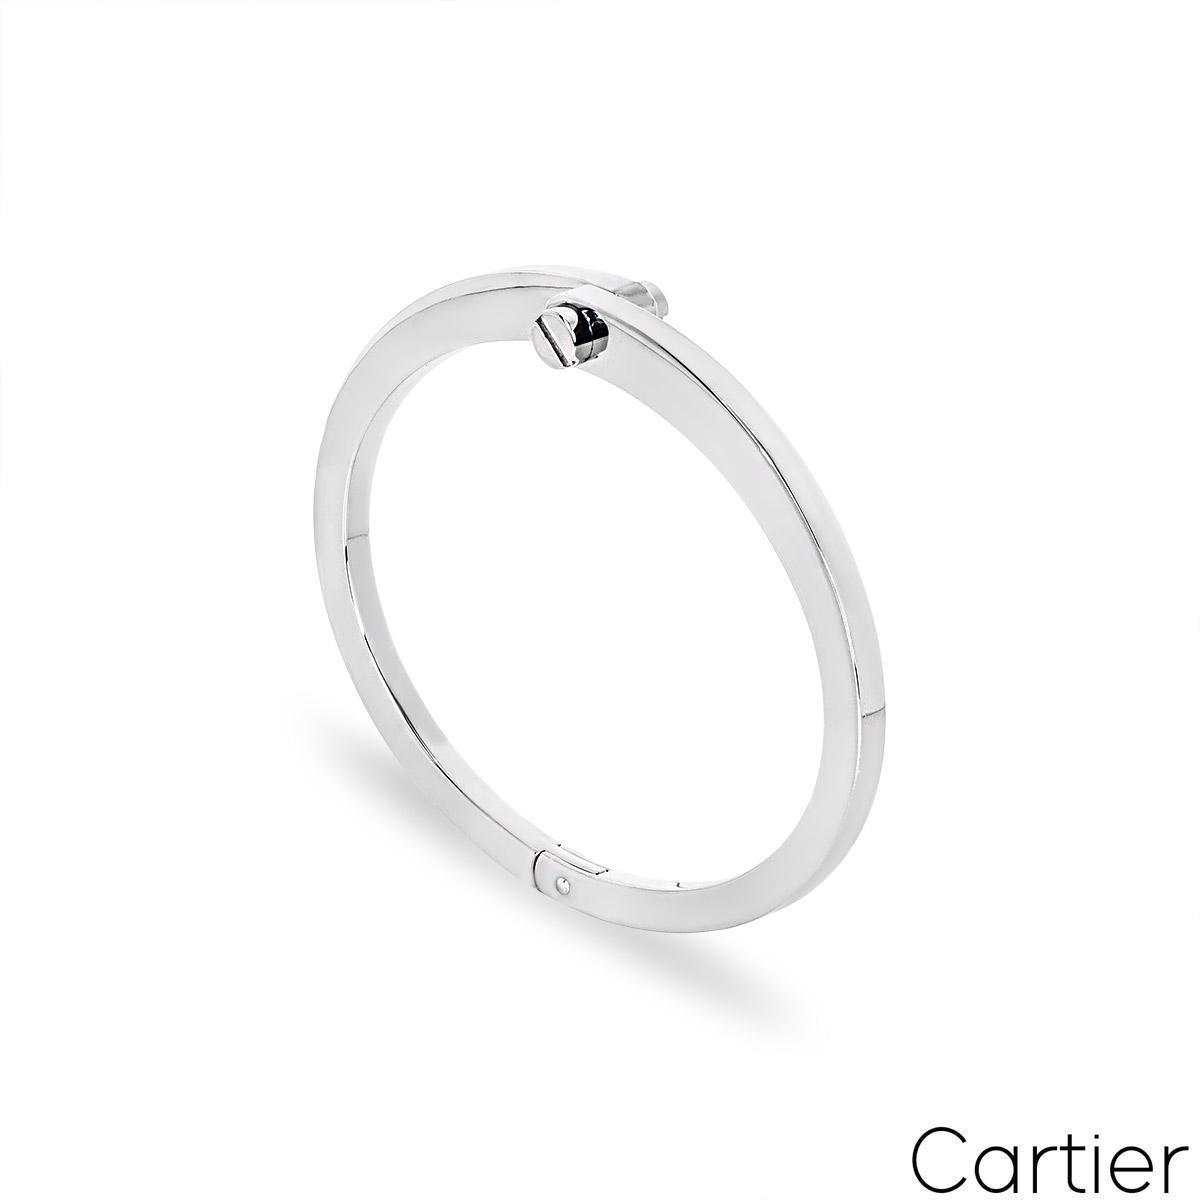 An 18k white gold Cartier bracelet from the Menotte collection. The bangle is joined together at the centre with two screw terminations and finishes with a hinge fitting. It measures 12.33mm wide and tapers down to 3.40mm, is a size 17 and has a